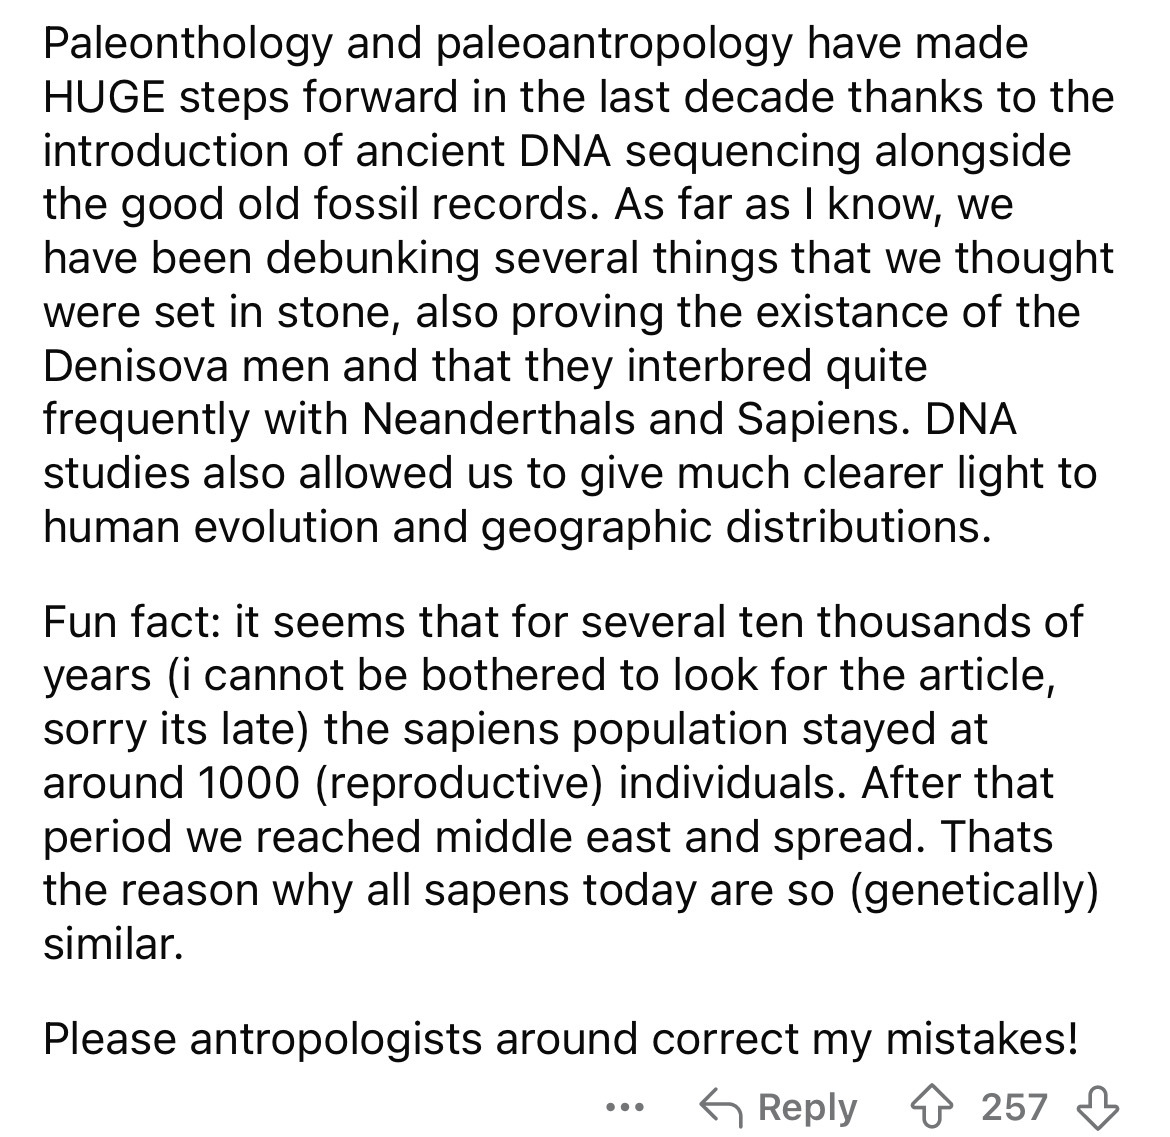 document - Paleonthology and paleoantropology have made Huge steps forward in the last decade thanks to the introduction of ancient Dna sequencing alongside the good old fossil records. As far as I know, we have been debunking several things that we thoug